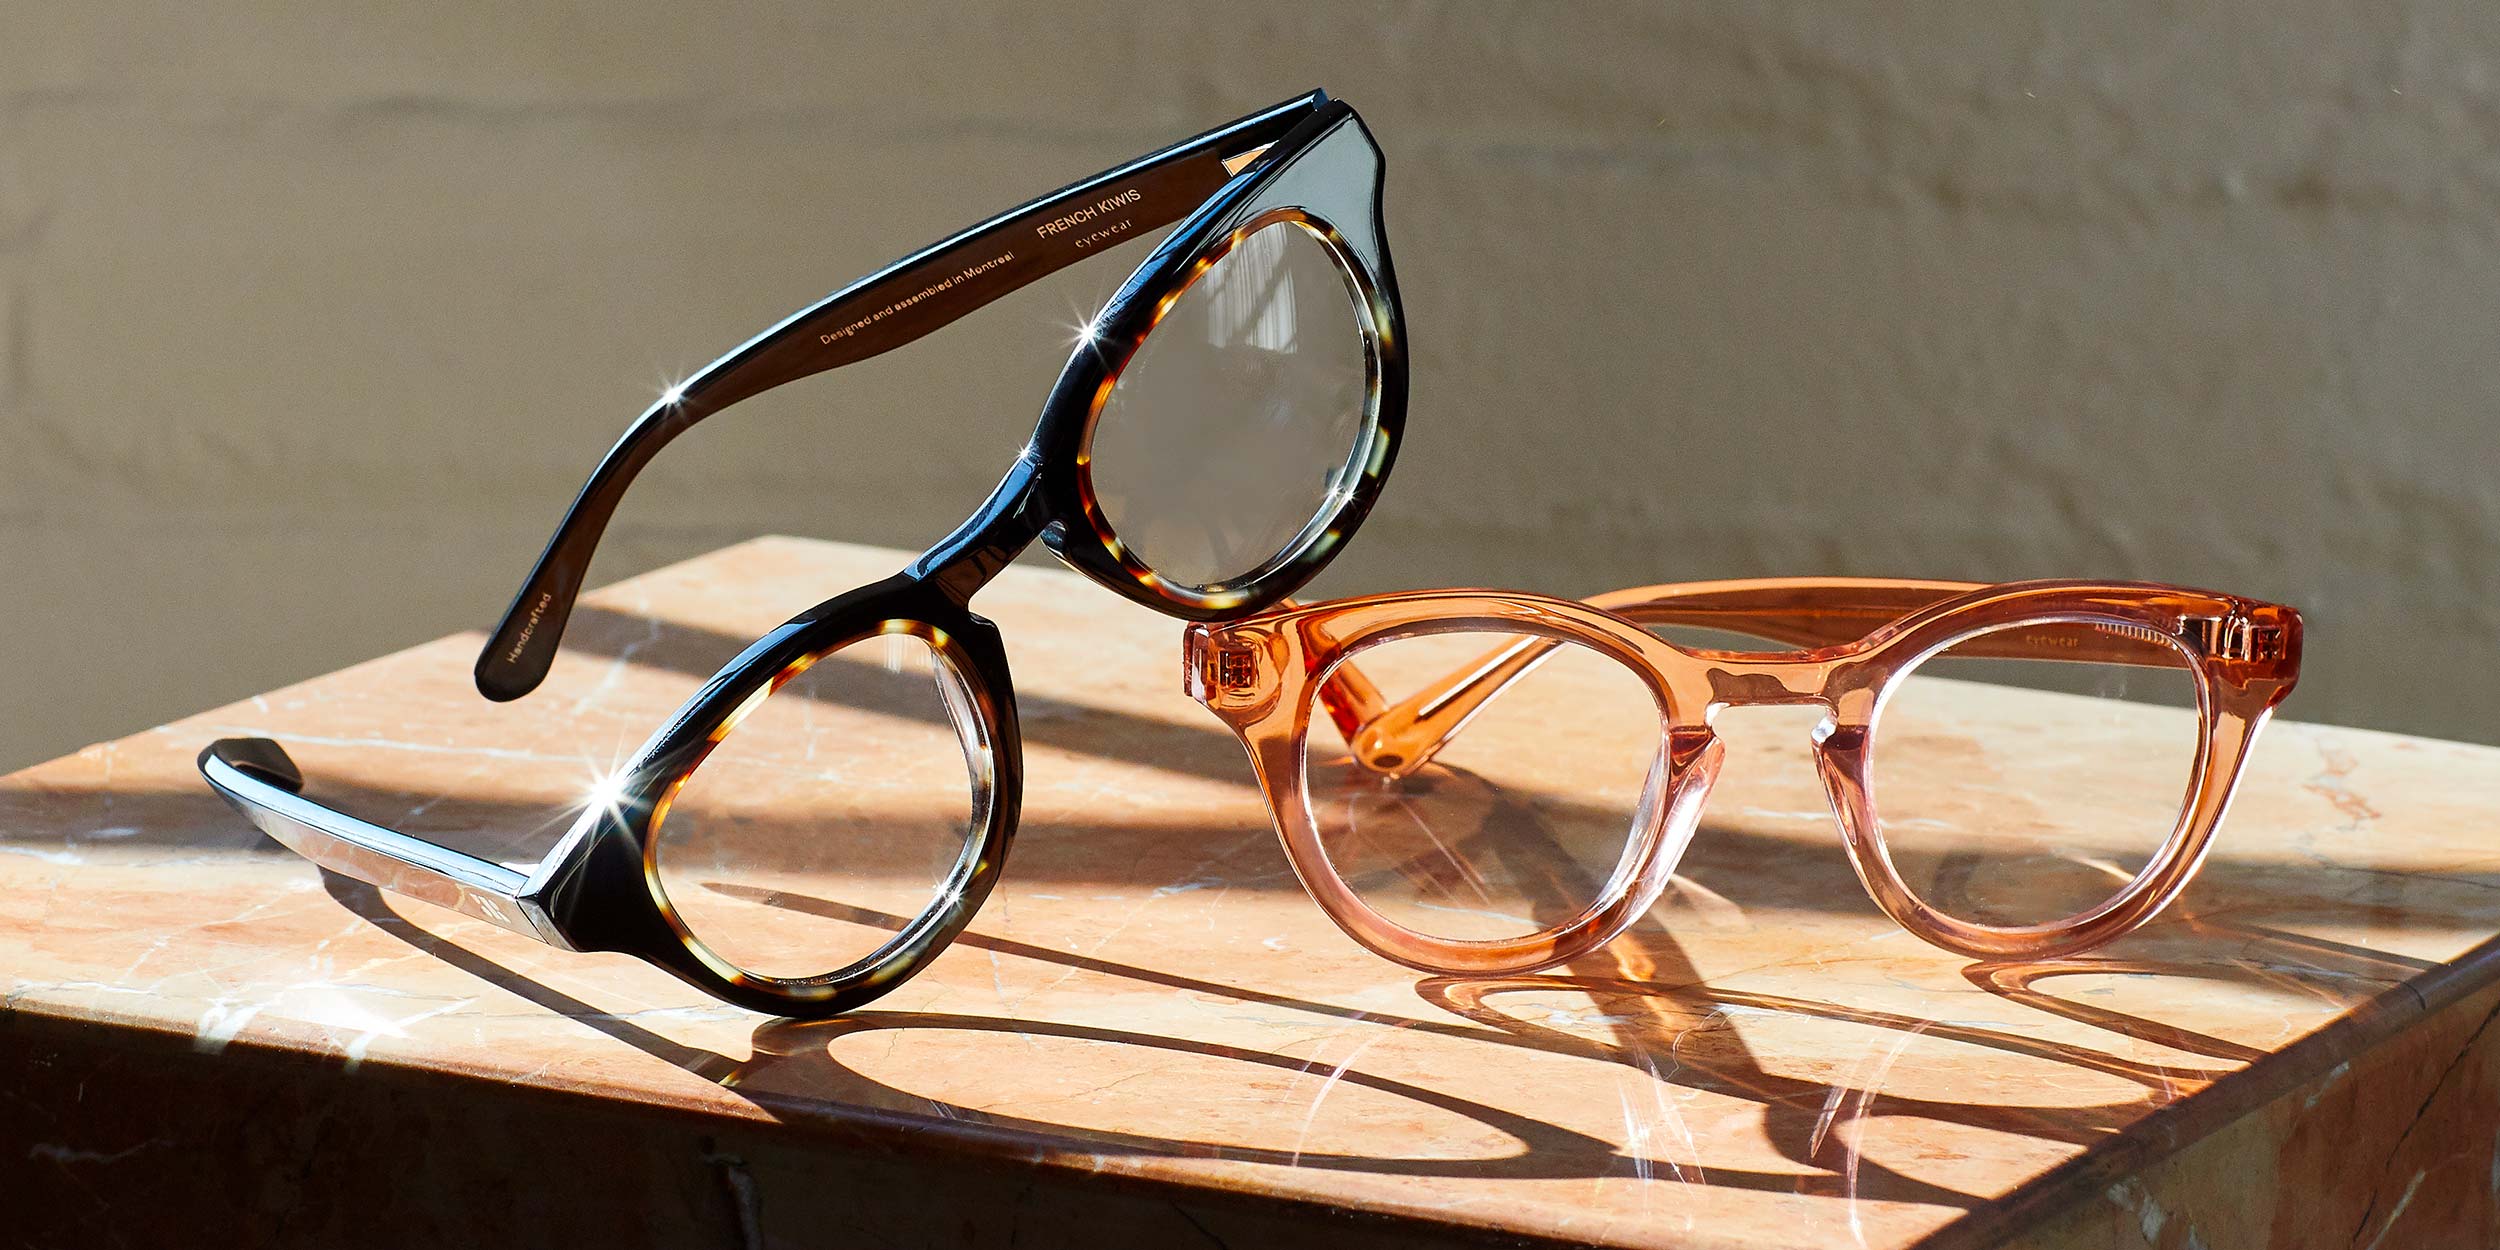 Photo Details of Sydney Rosé & Peach Marble Reading Glasses in a room